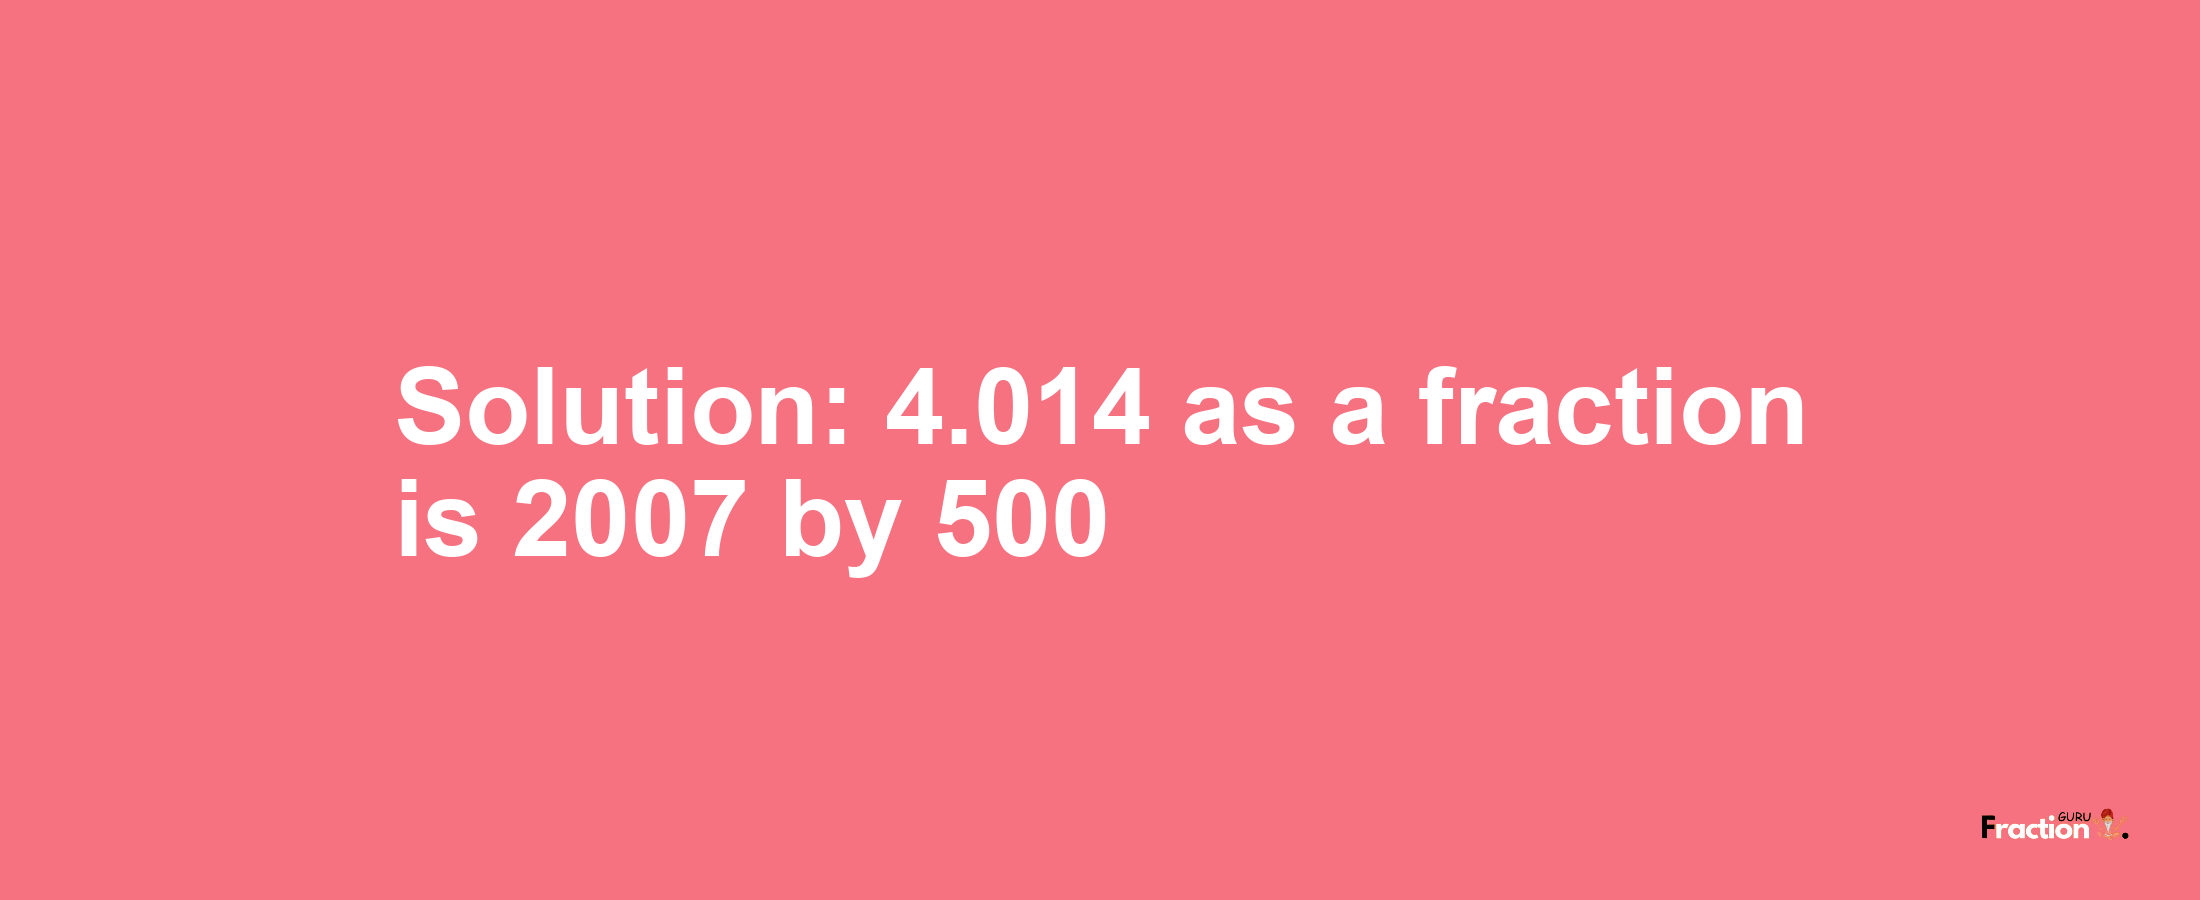 Solution:4.014 as a fraction is 2007/500